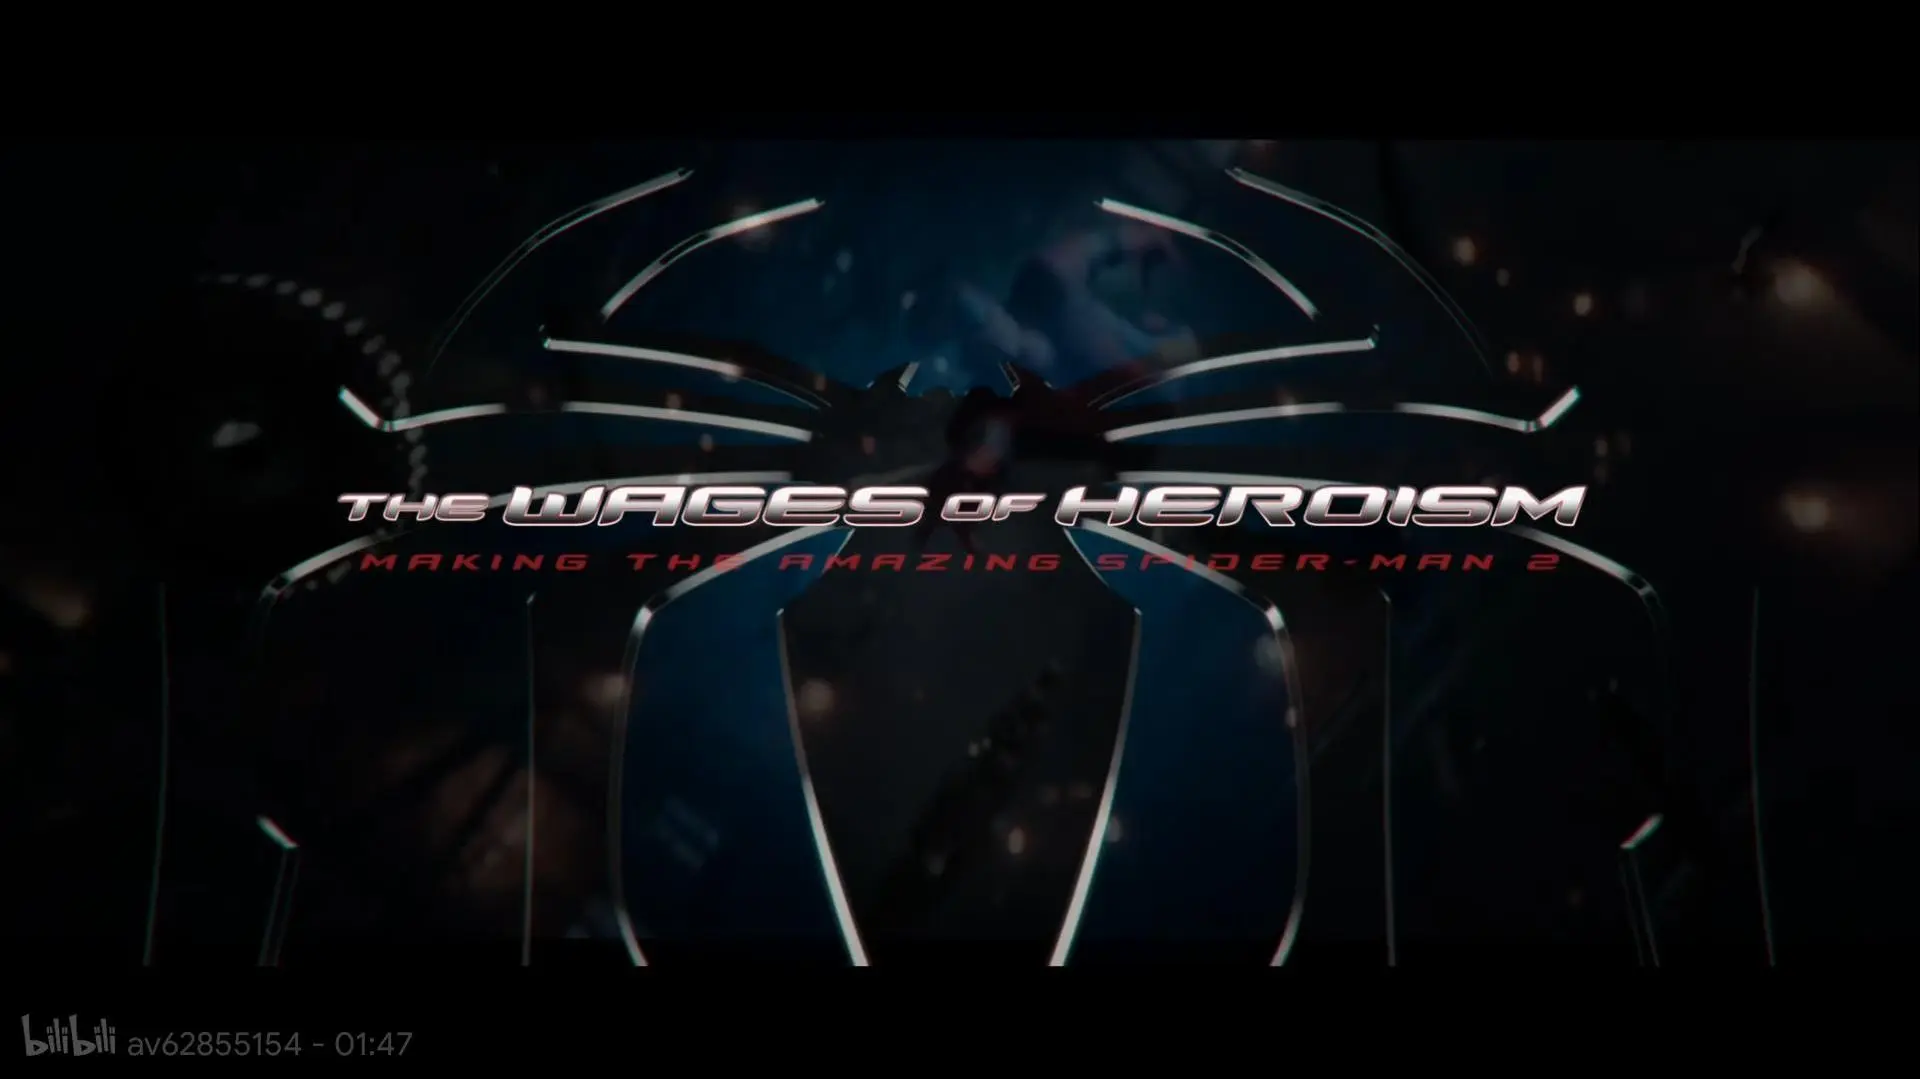 The Wages of Heroism: Making the Amazing Spider-Man 2_peliplat